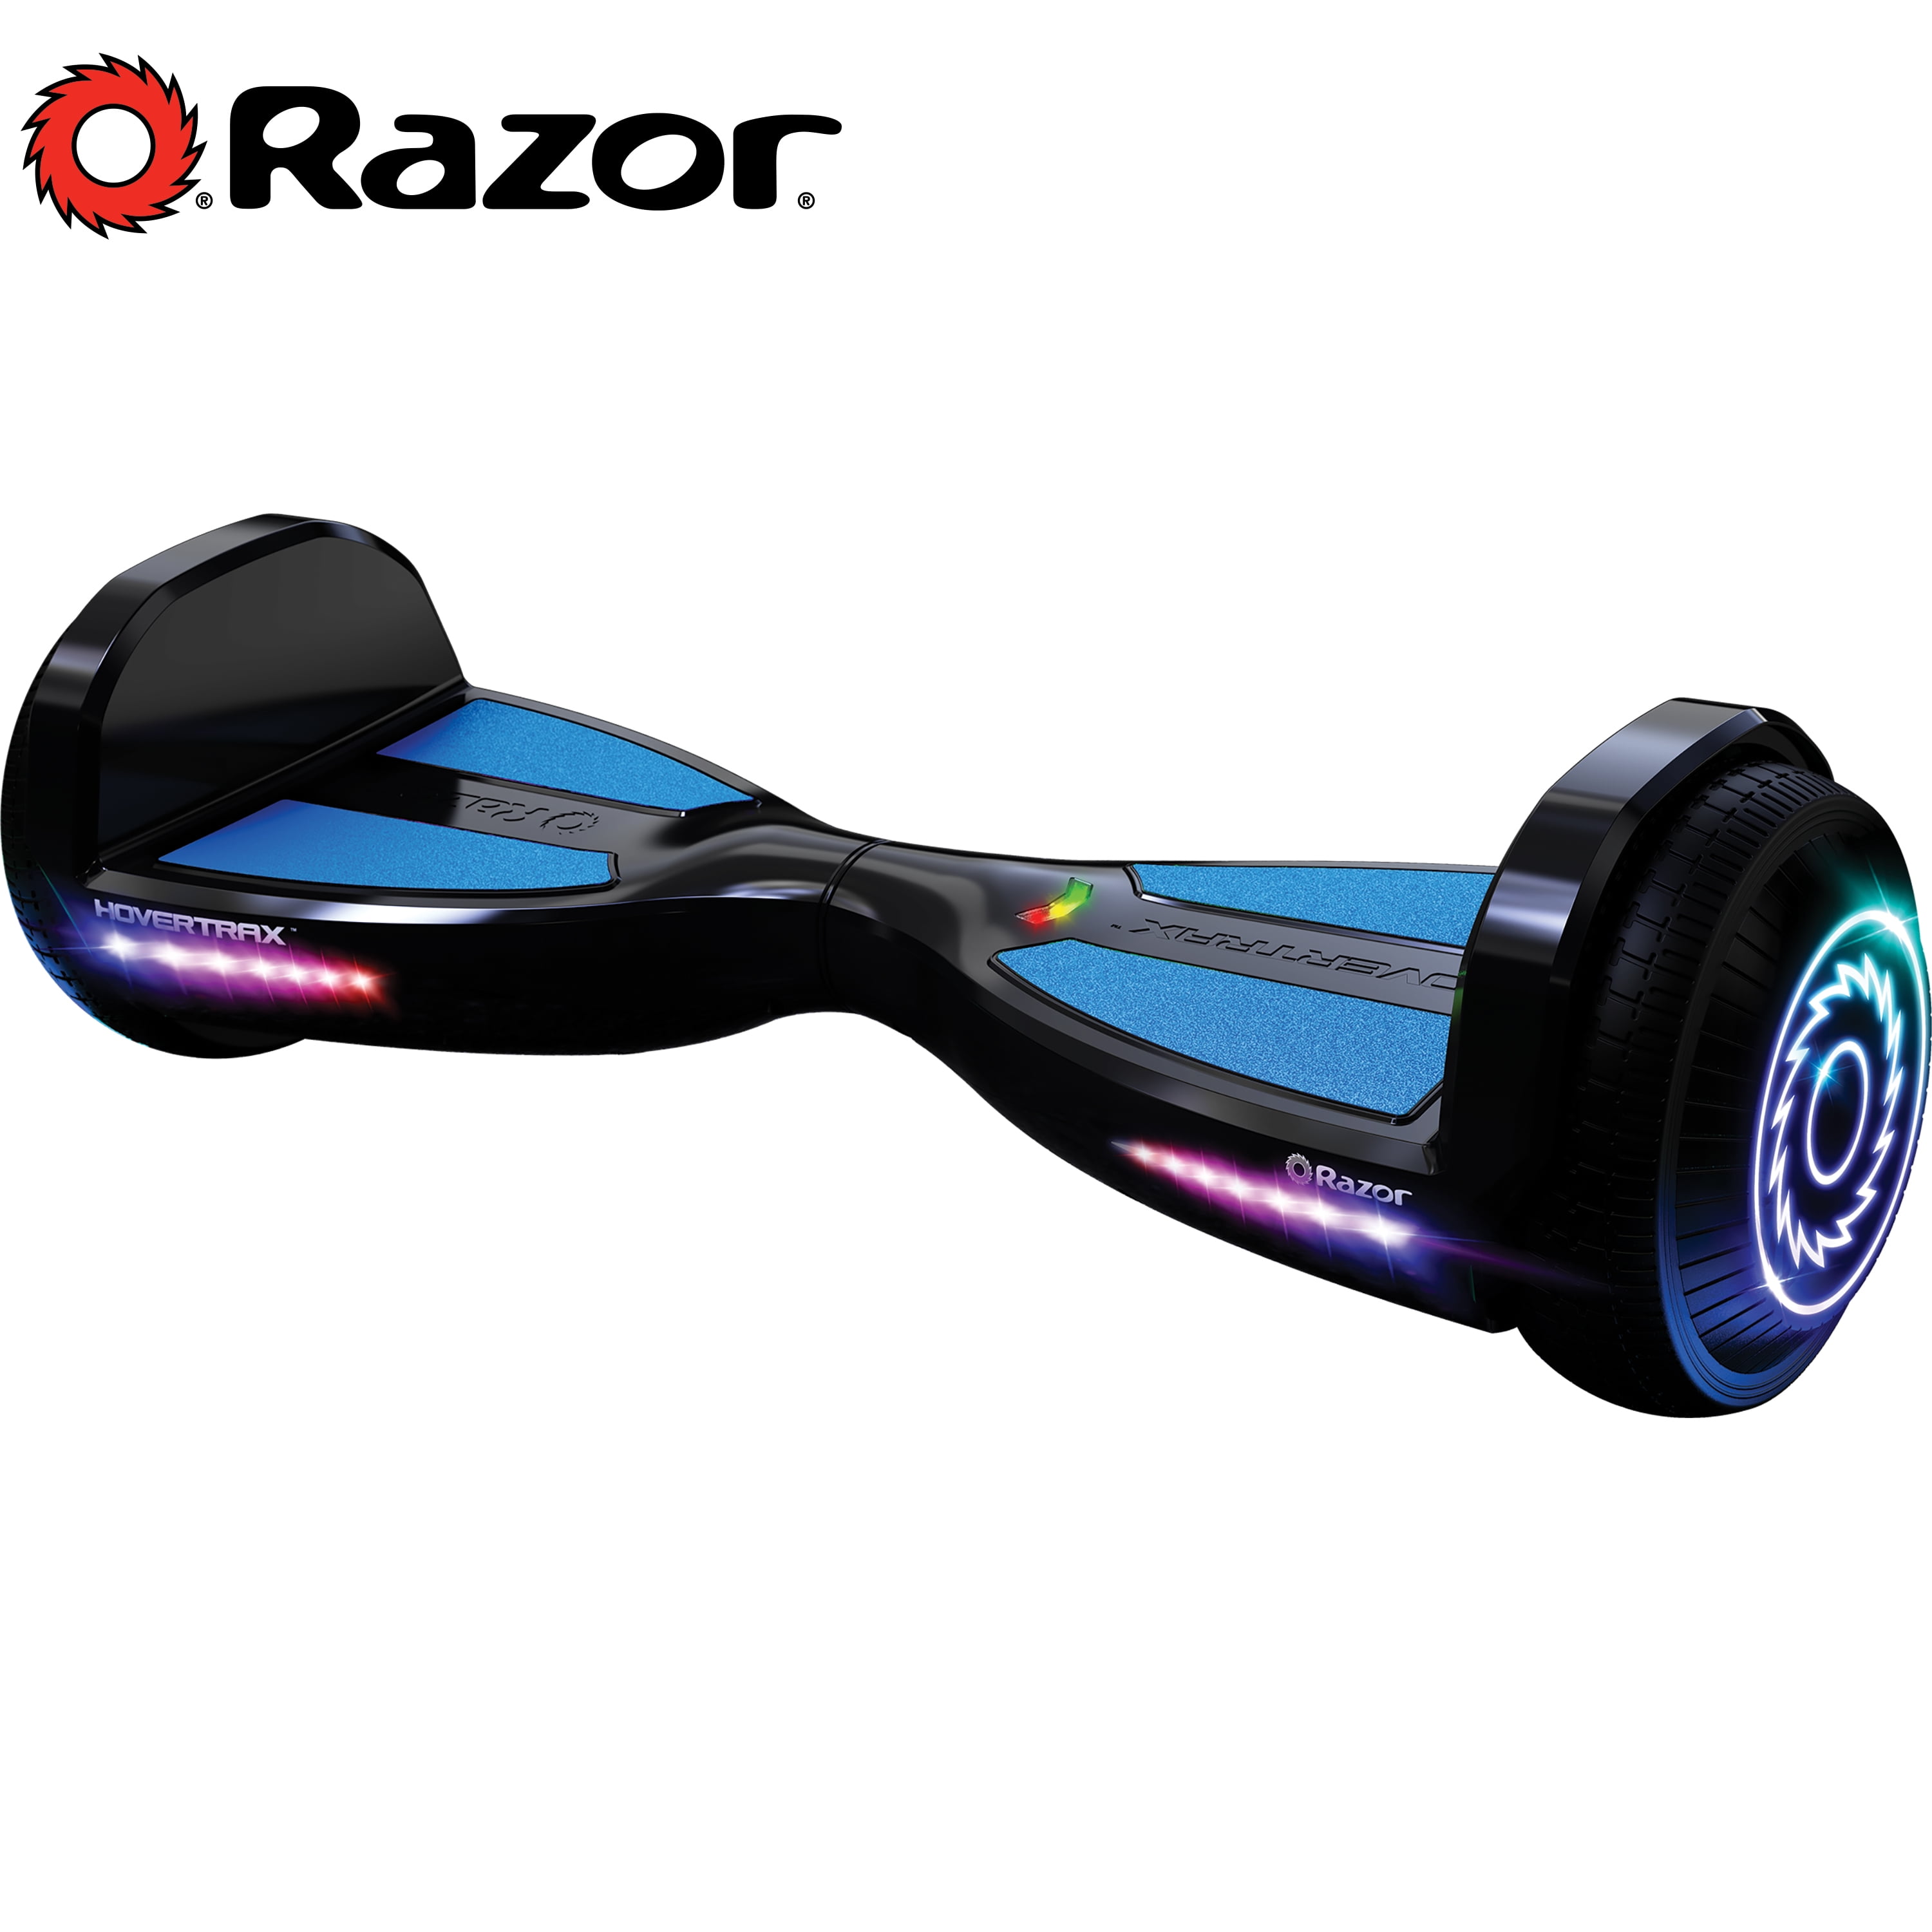 Ballade Prædike Polering Razor Black Label Hovertrax Hoverboard for Kids Ages 8 and up - Black,  Customizable Color Grip Tape & LED Lights, Up to 9 mph and 6-mile Range,  25.2V Lithium-Ion Battery, UL2272 Certified -